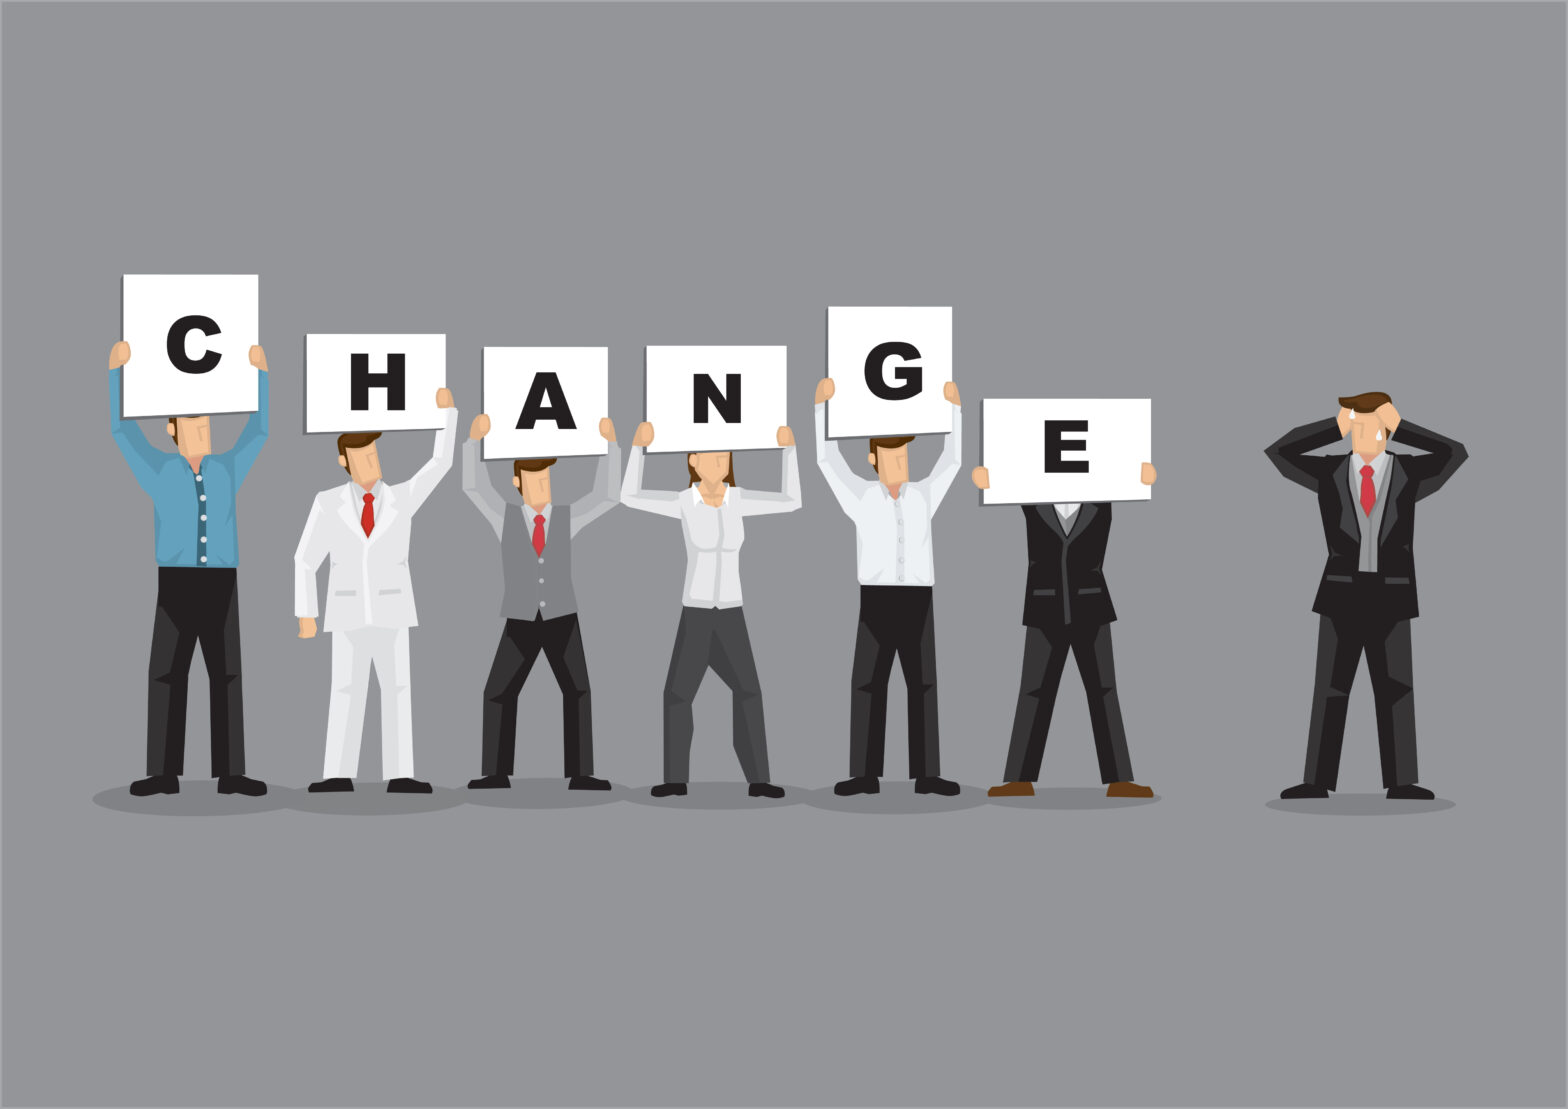 Organisational agility: thriving from change